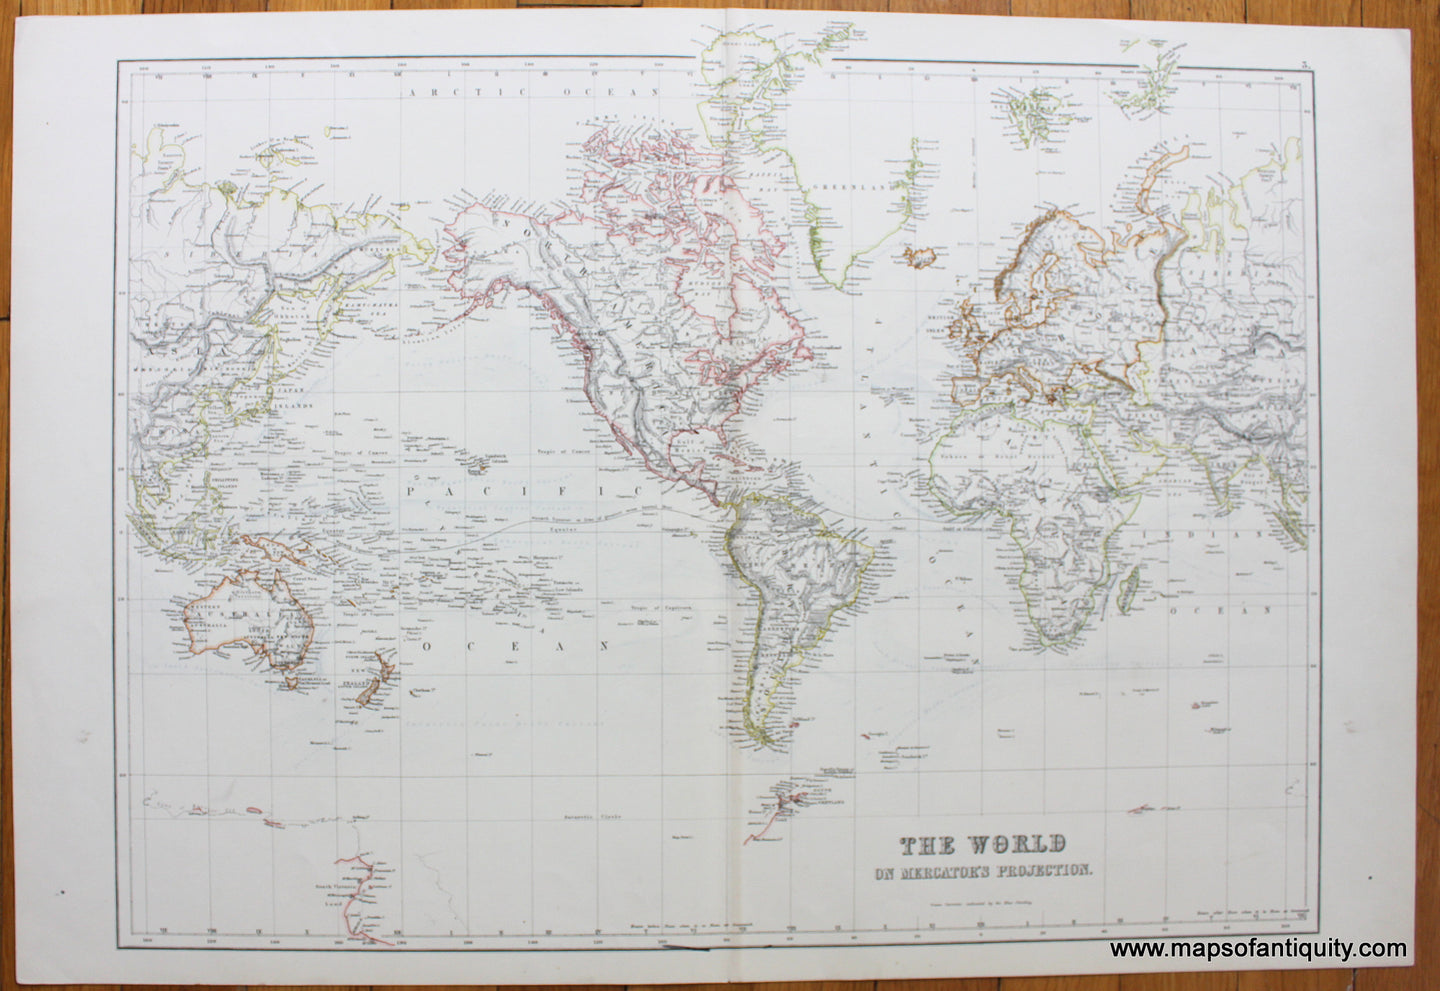 Antique-Printed-Color-Map-The-World-on-Mercator's-Projection-World--c.-1890--Maps-Of-Antiquity